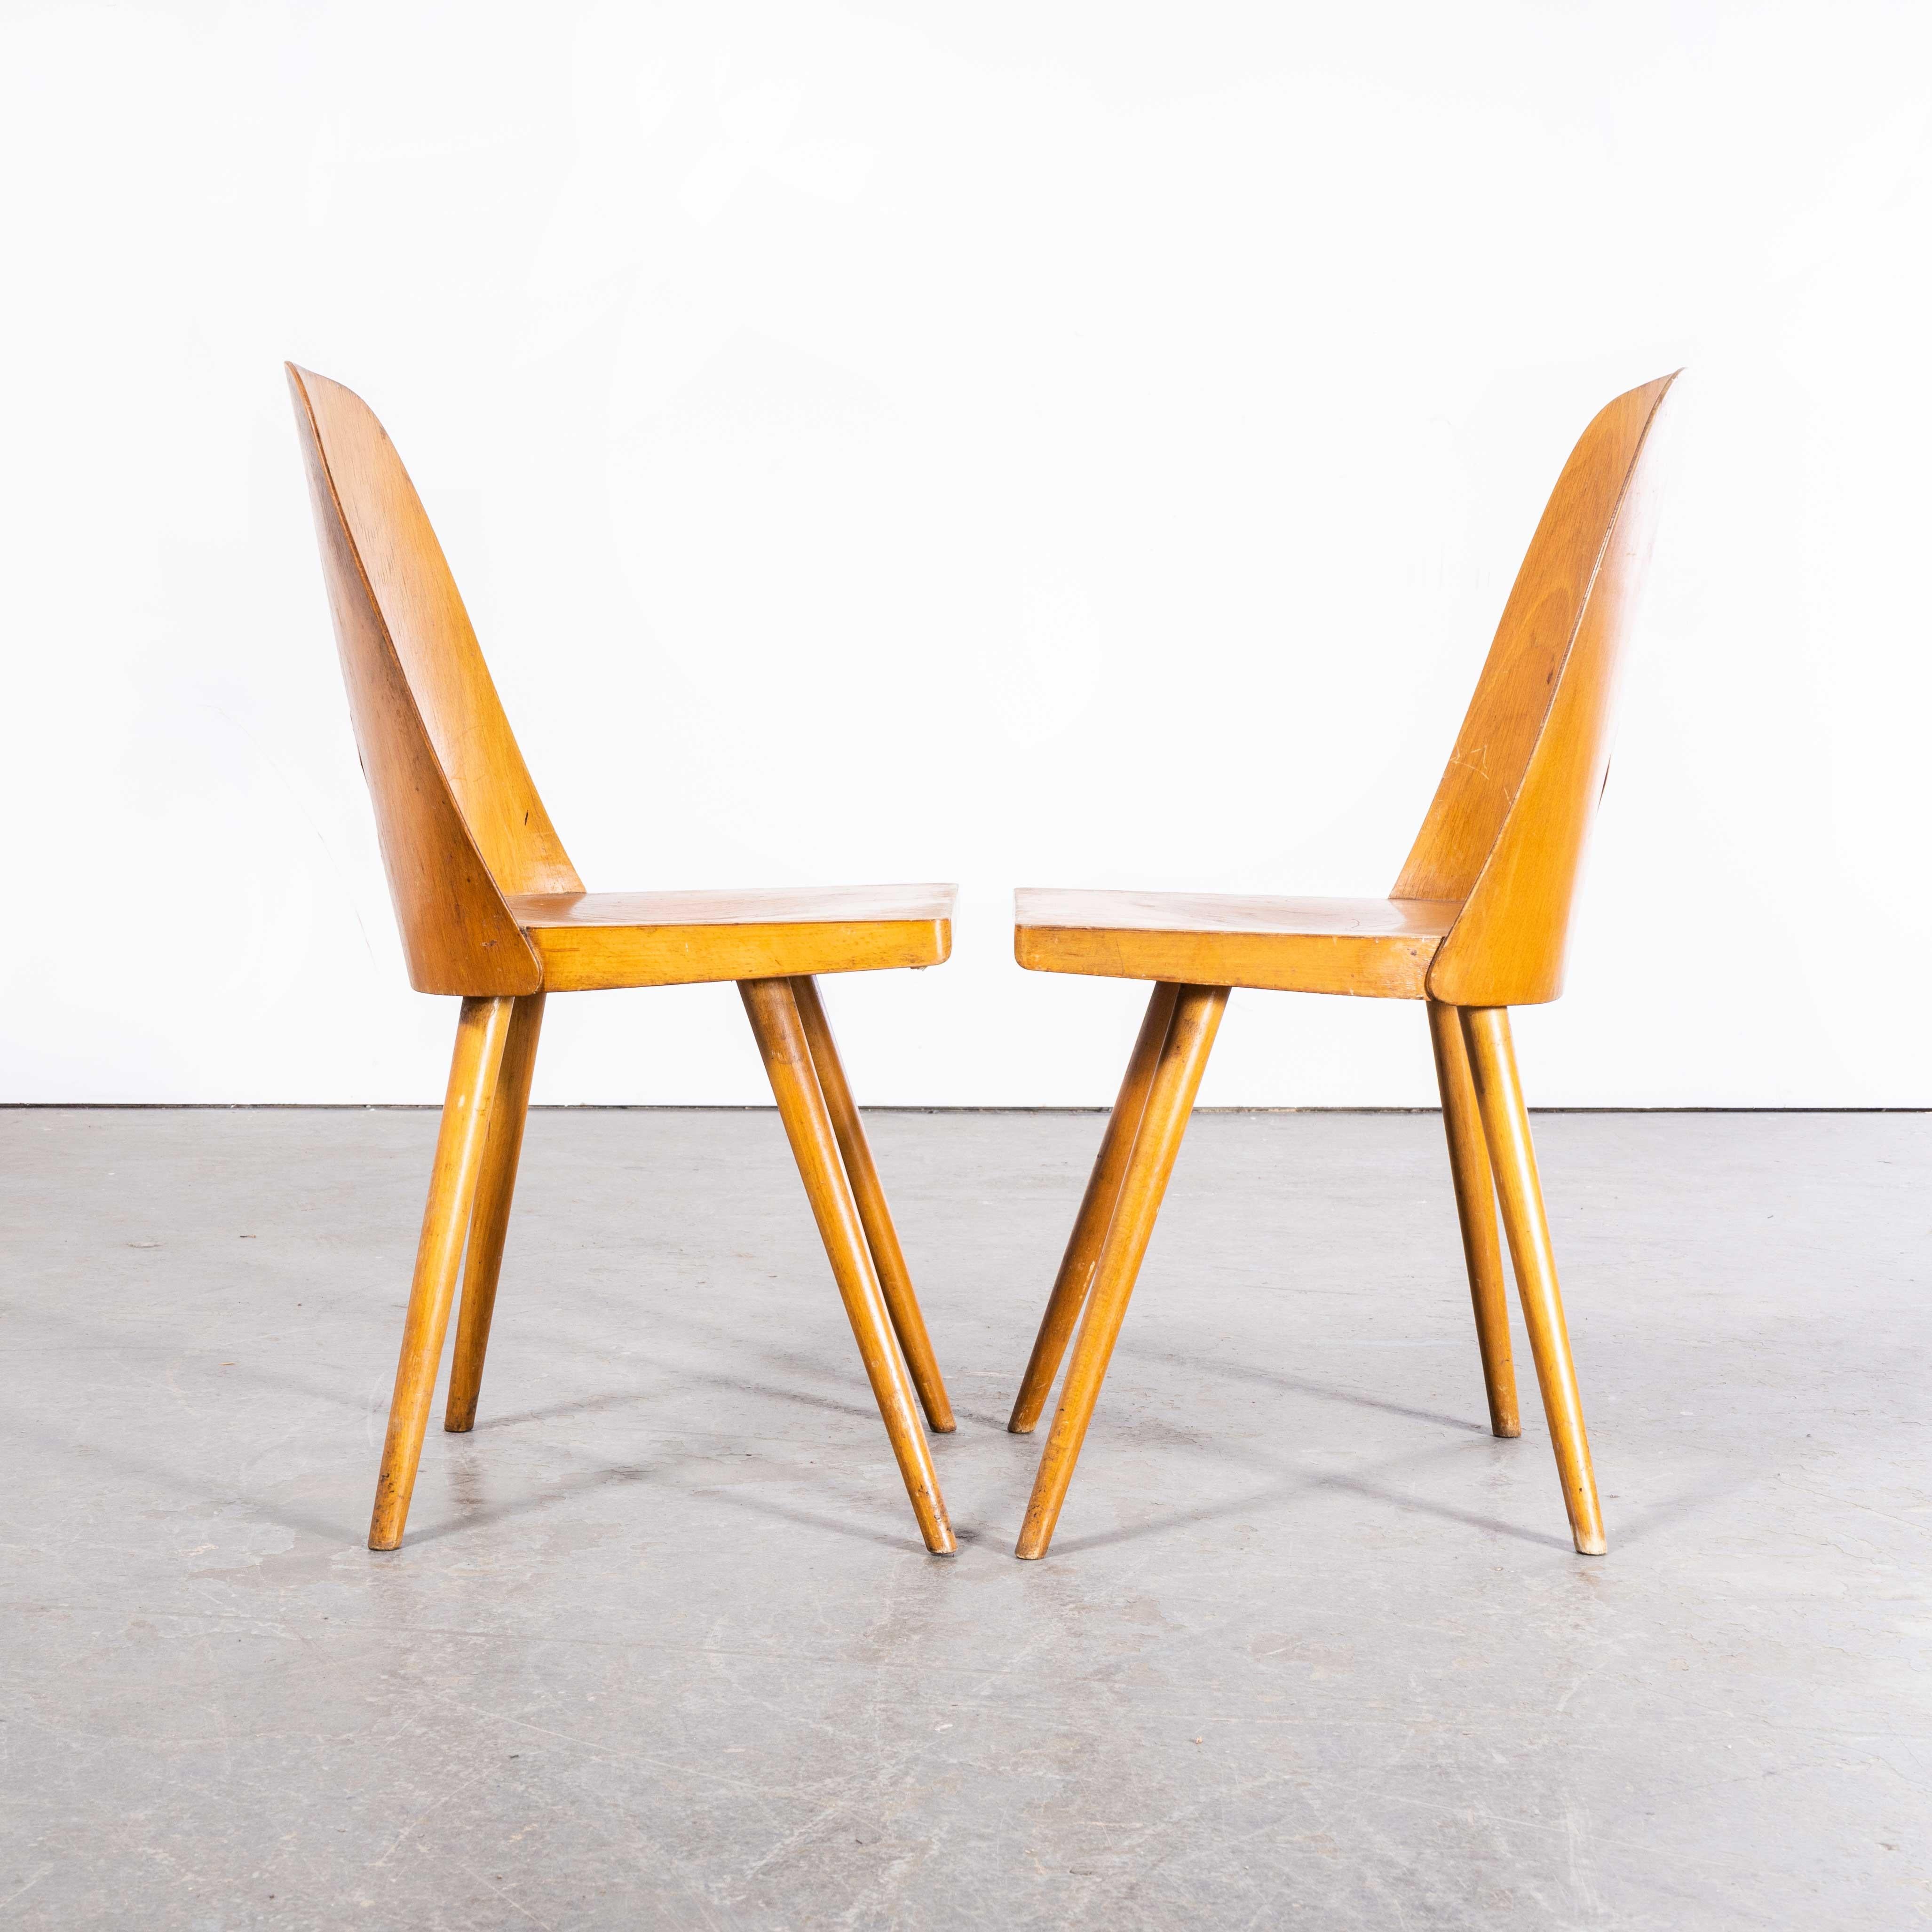 1950s Fretwork Detail Dining Chairs by Radomir Hoffman, Pair For Sale 1